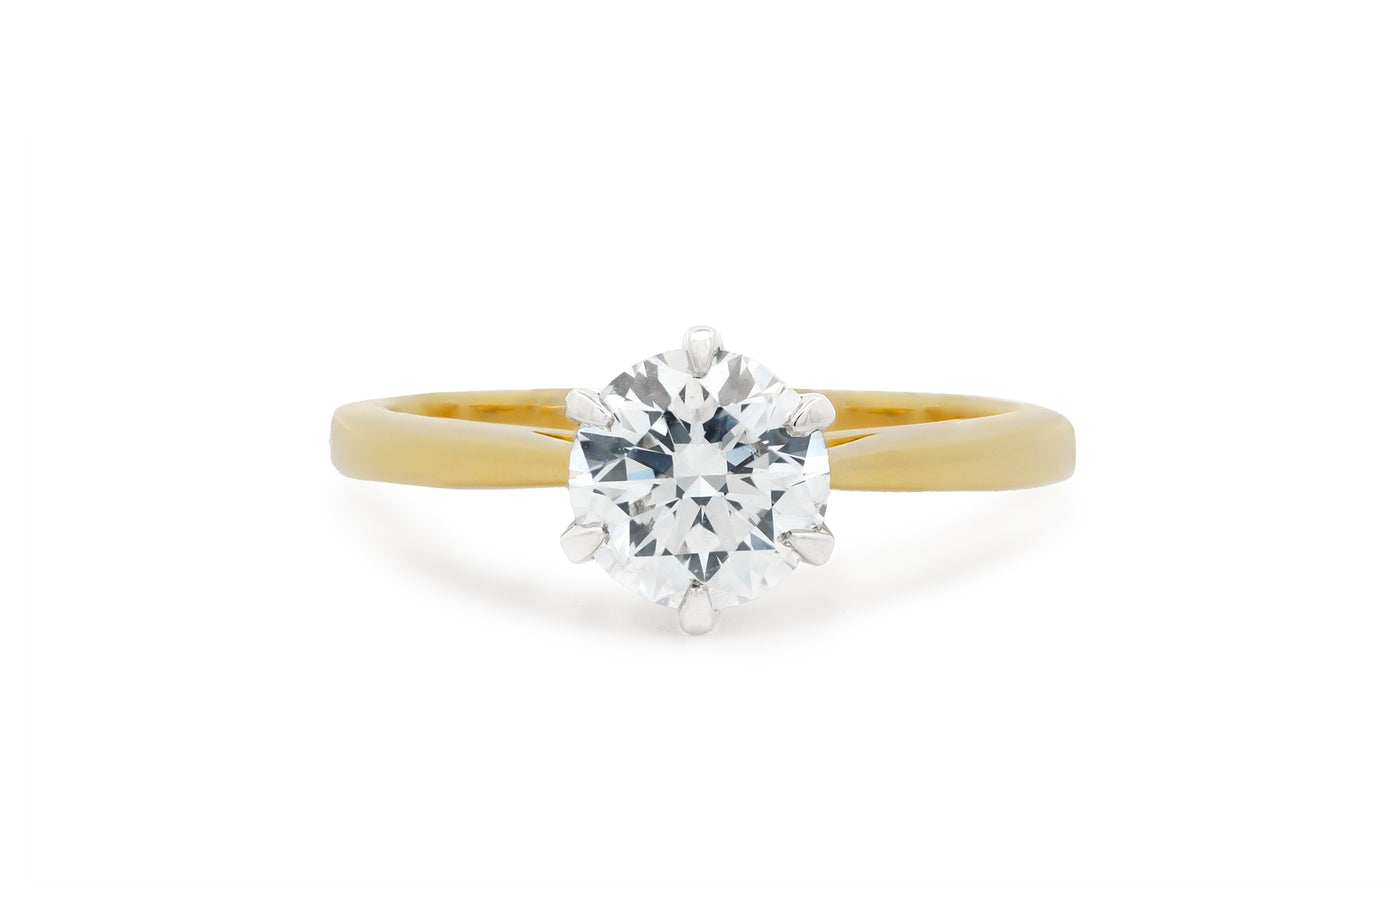 Jolie: Brilliant Cut Diamond Solitaire Ring in Yellow Gold